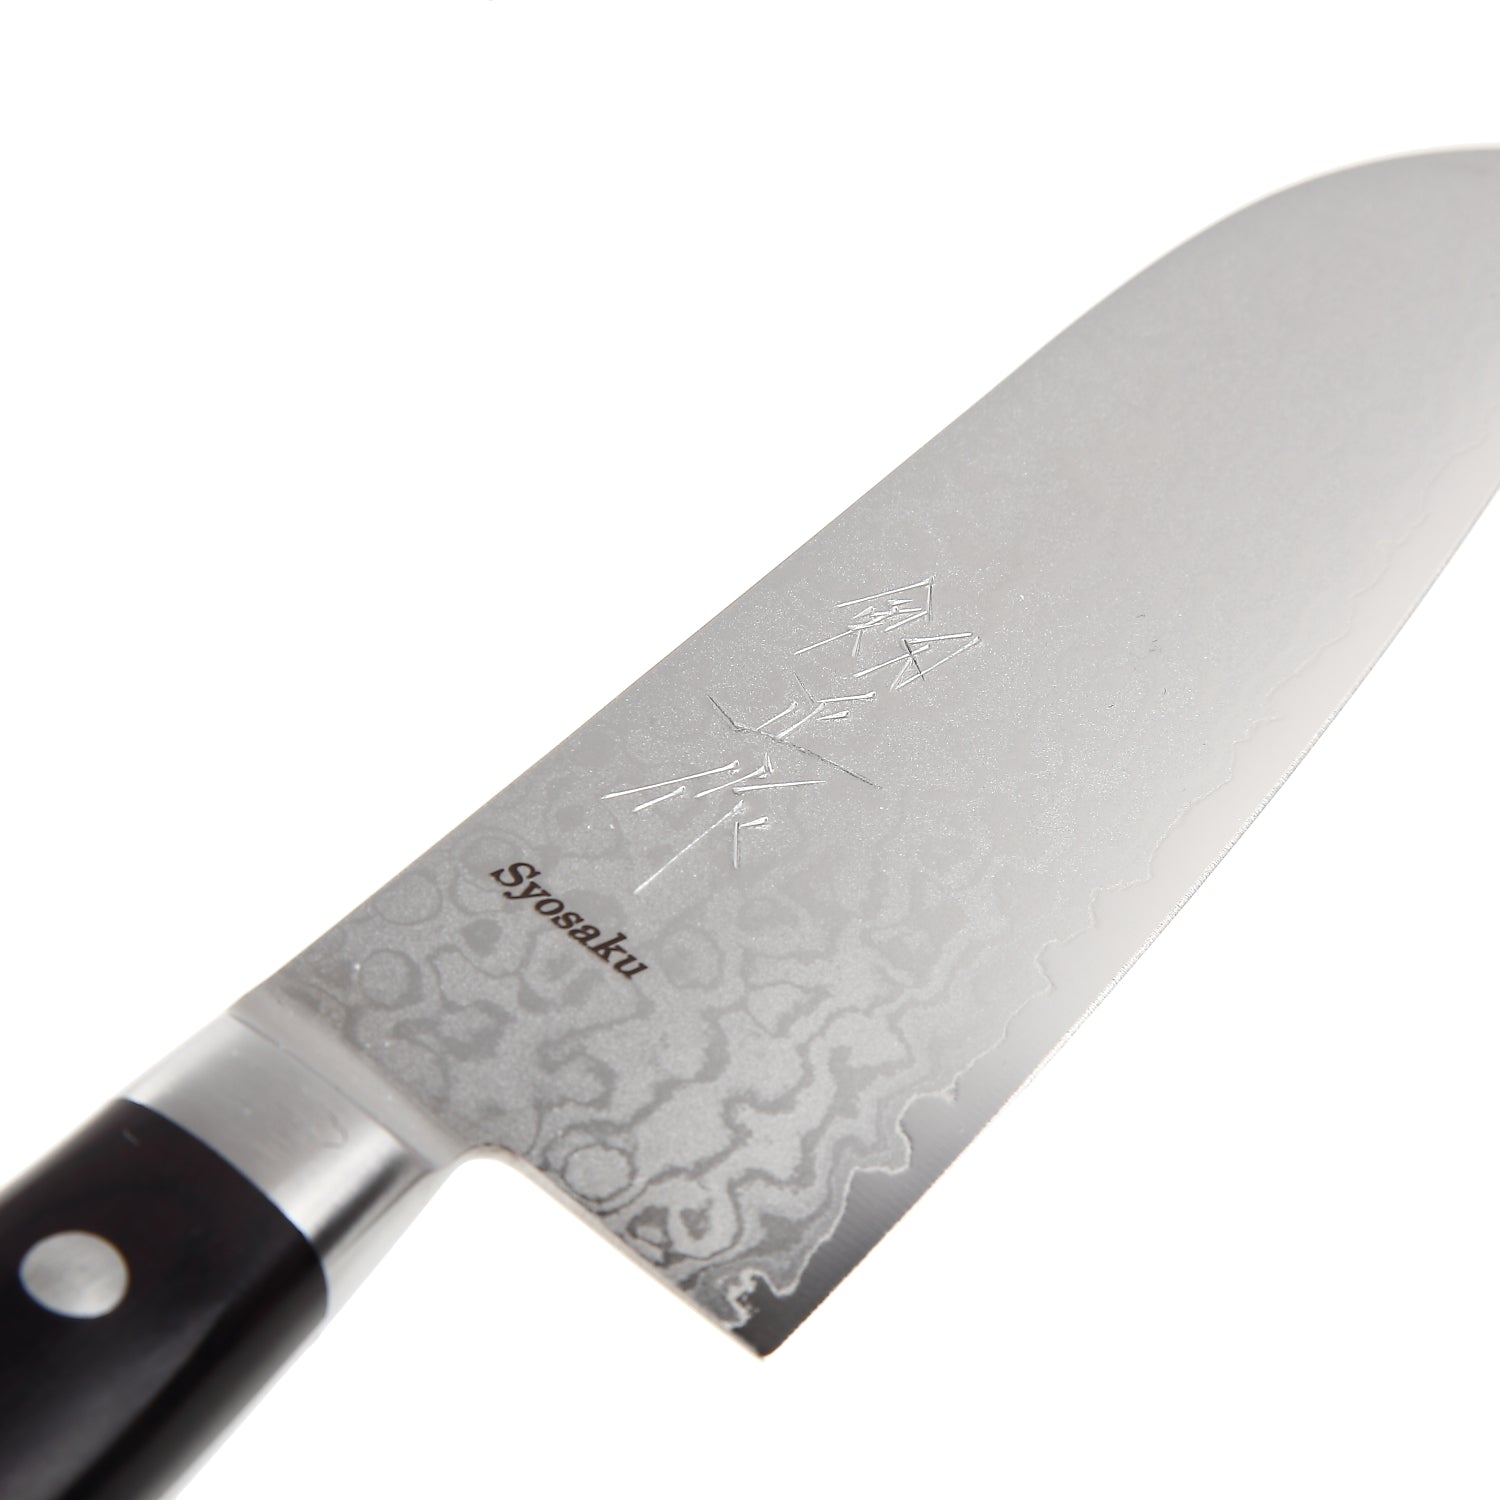 MAD SHARK Santoku Knife 8 Inch, Japanese Chef Knife, Multi-purpose Kitchen  Cooking Knife for Chopping Meat and Vegetables, Ergonomic 2.0 Handle